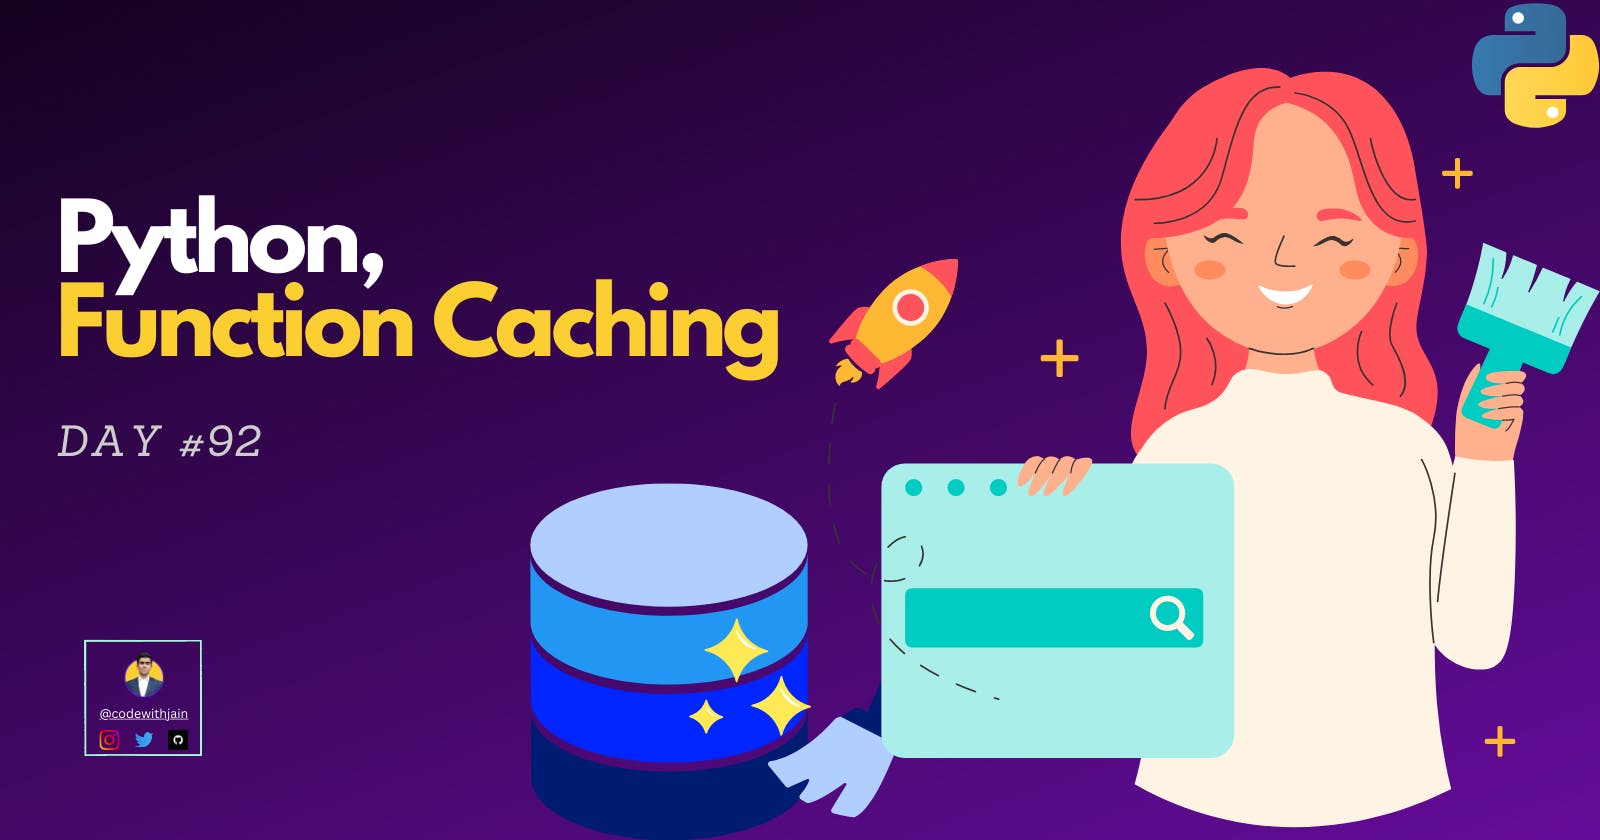 Day #92 - Function Caching in Python